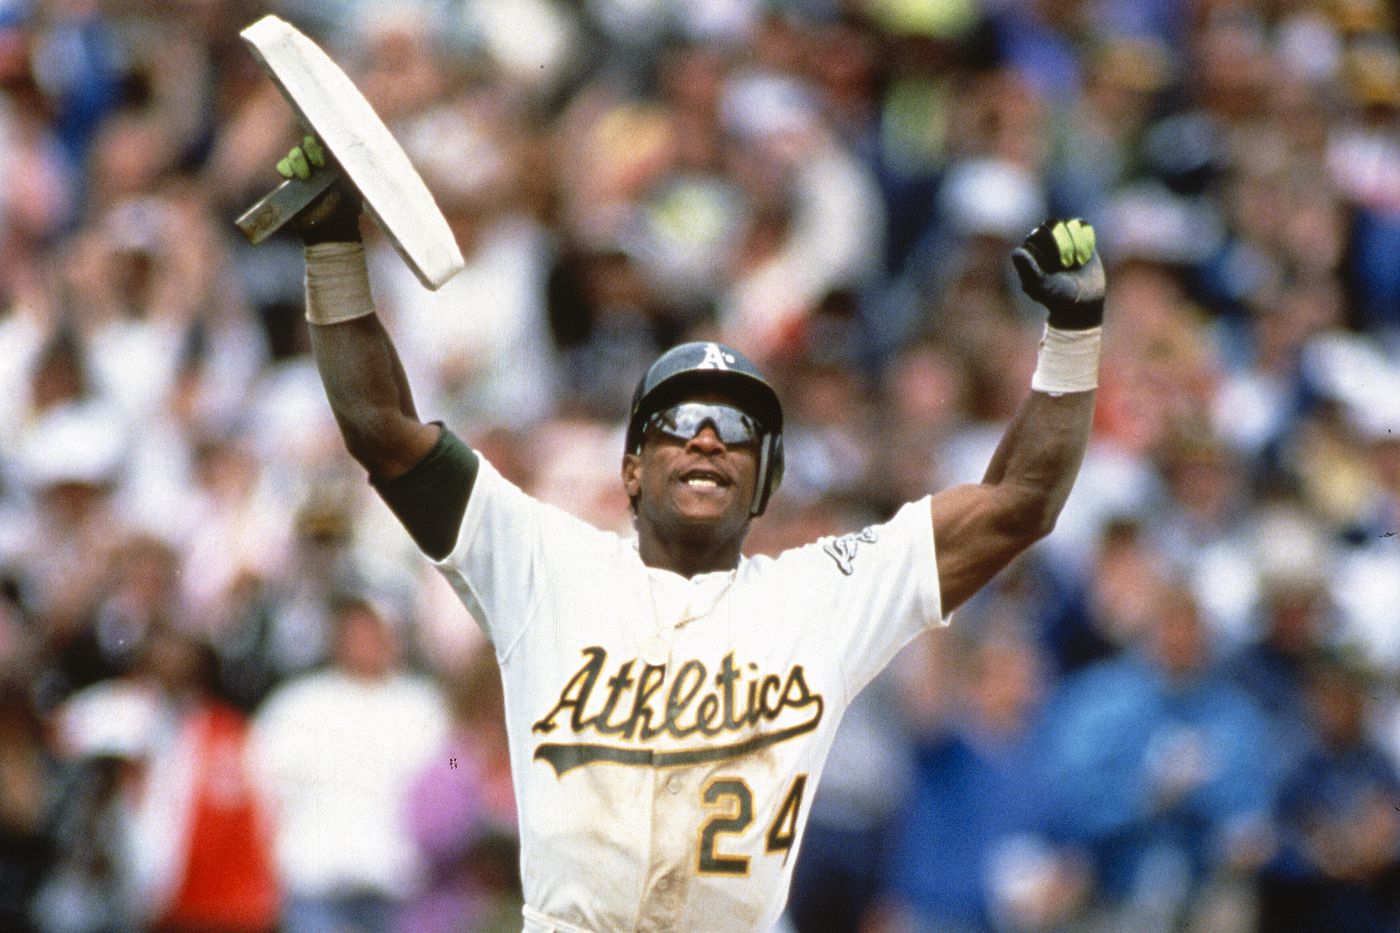 Rickey Henderson Wallpapers - Wallpaper Cave